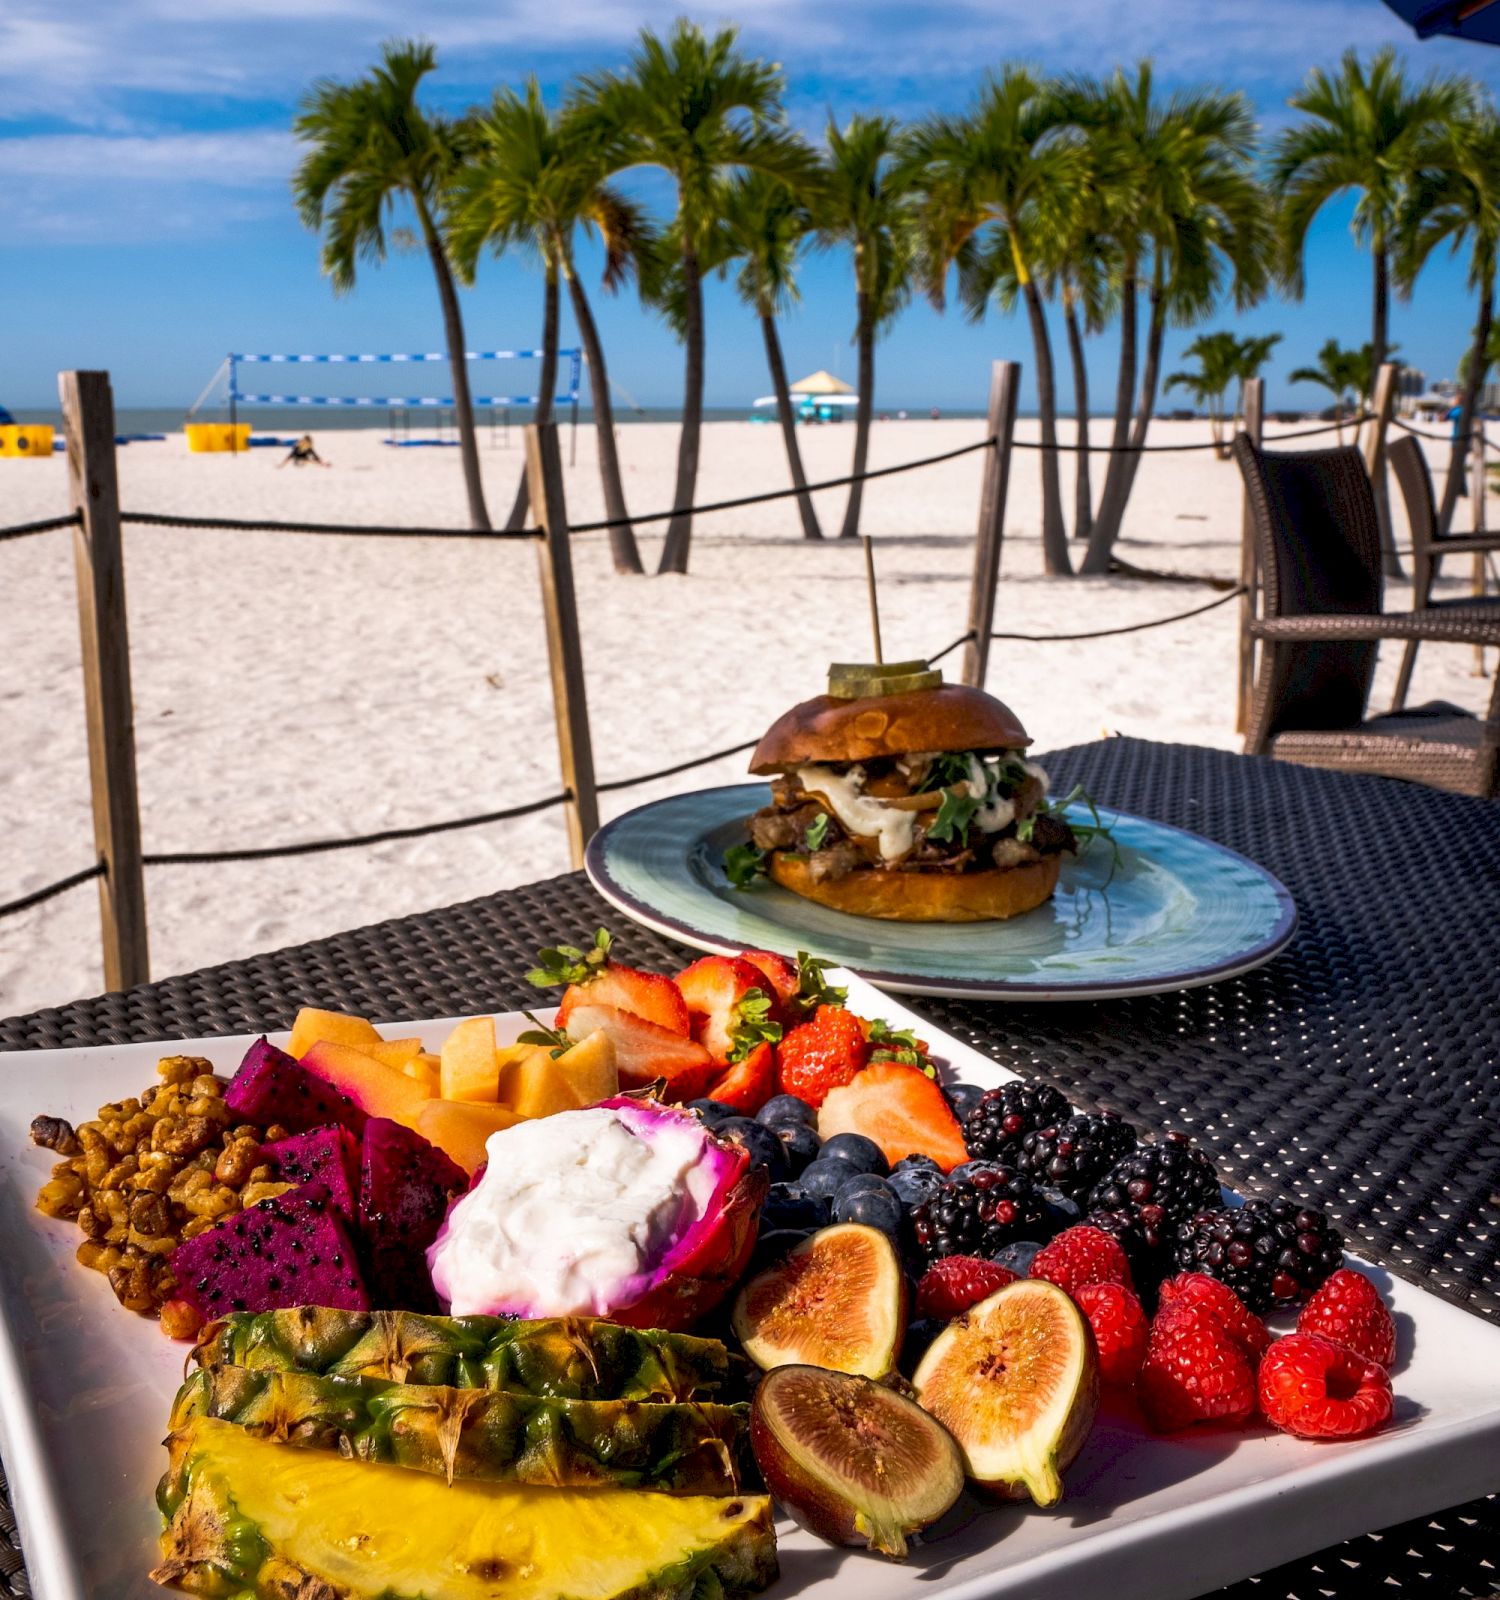 A plate of tropical fruit and a sandwich, on a table by a beach with palm trees and a pier, under a blue sky.